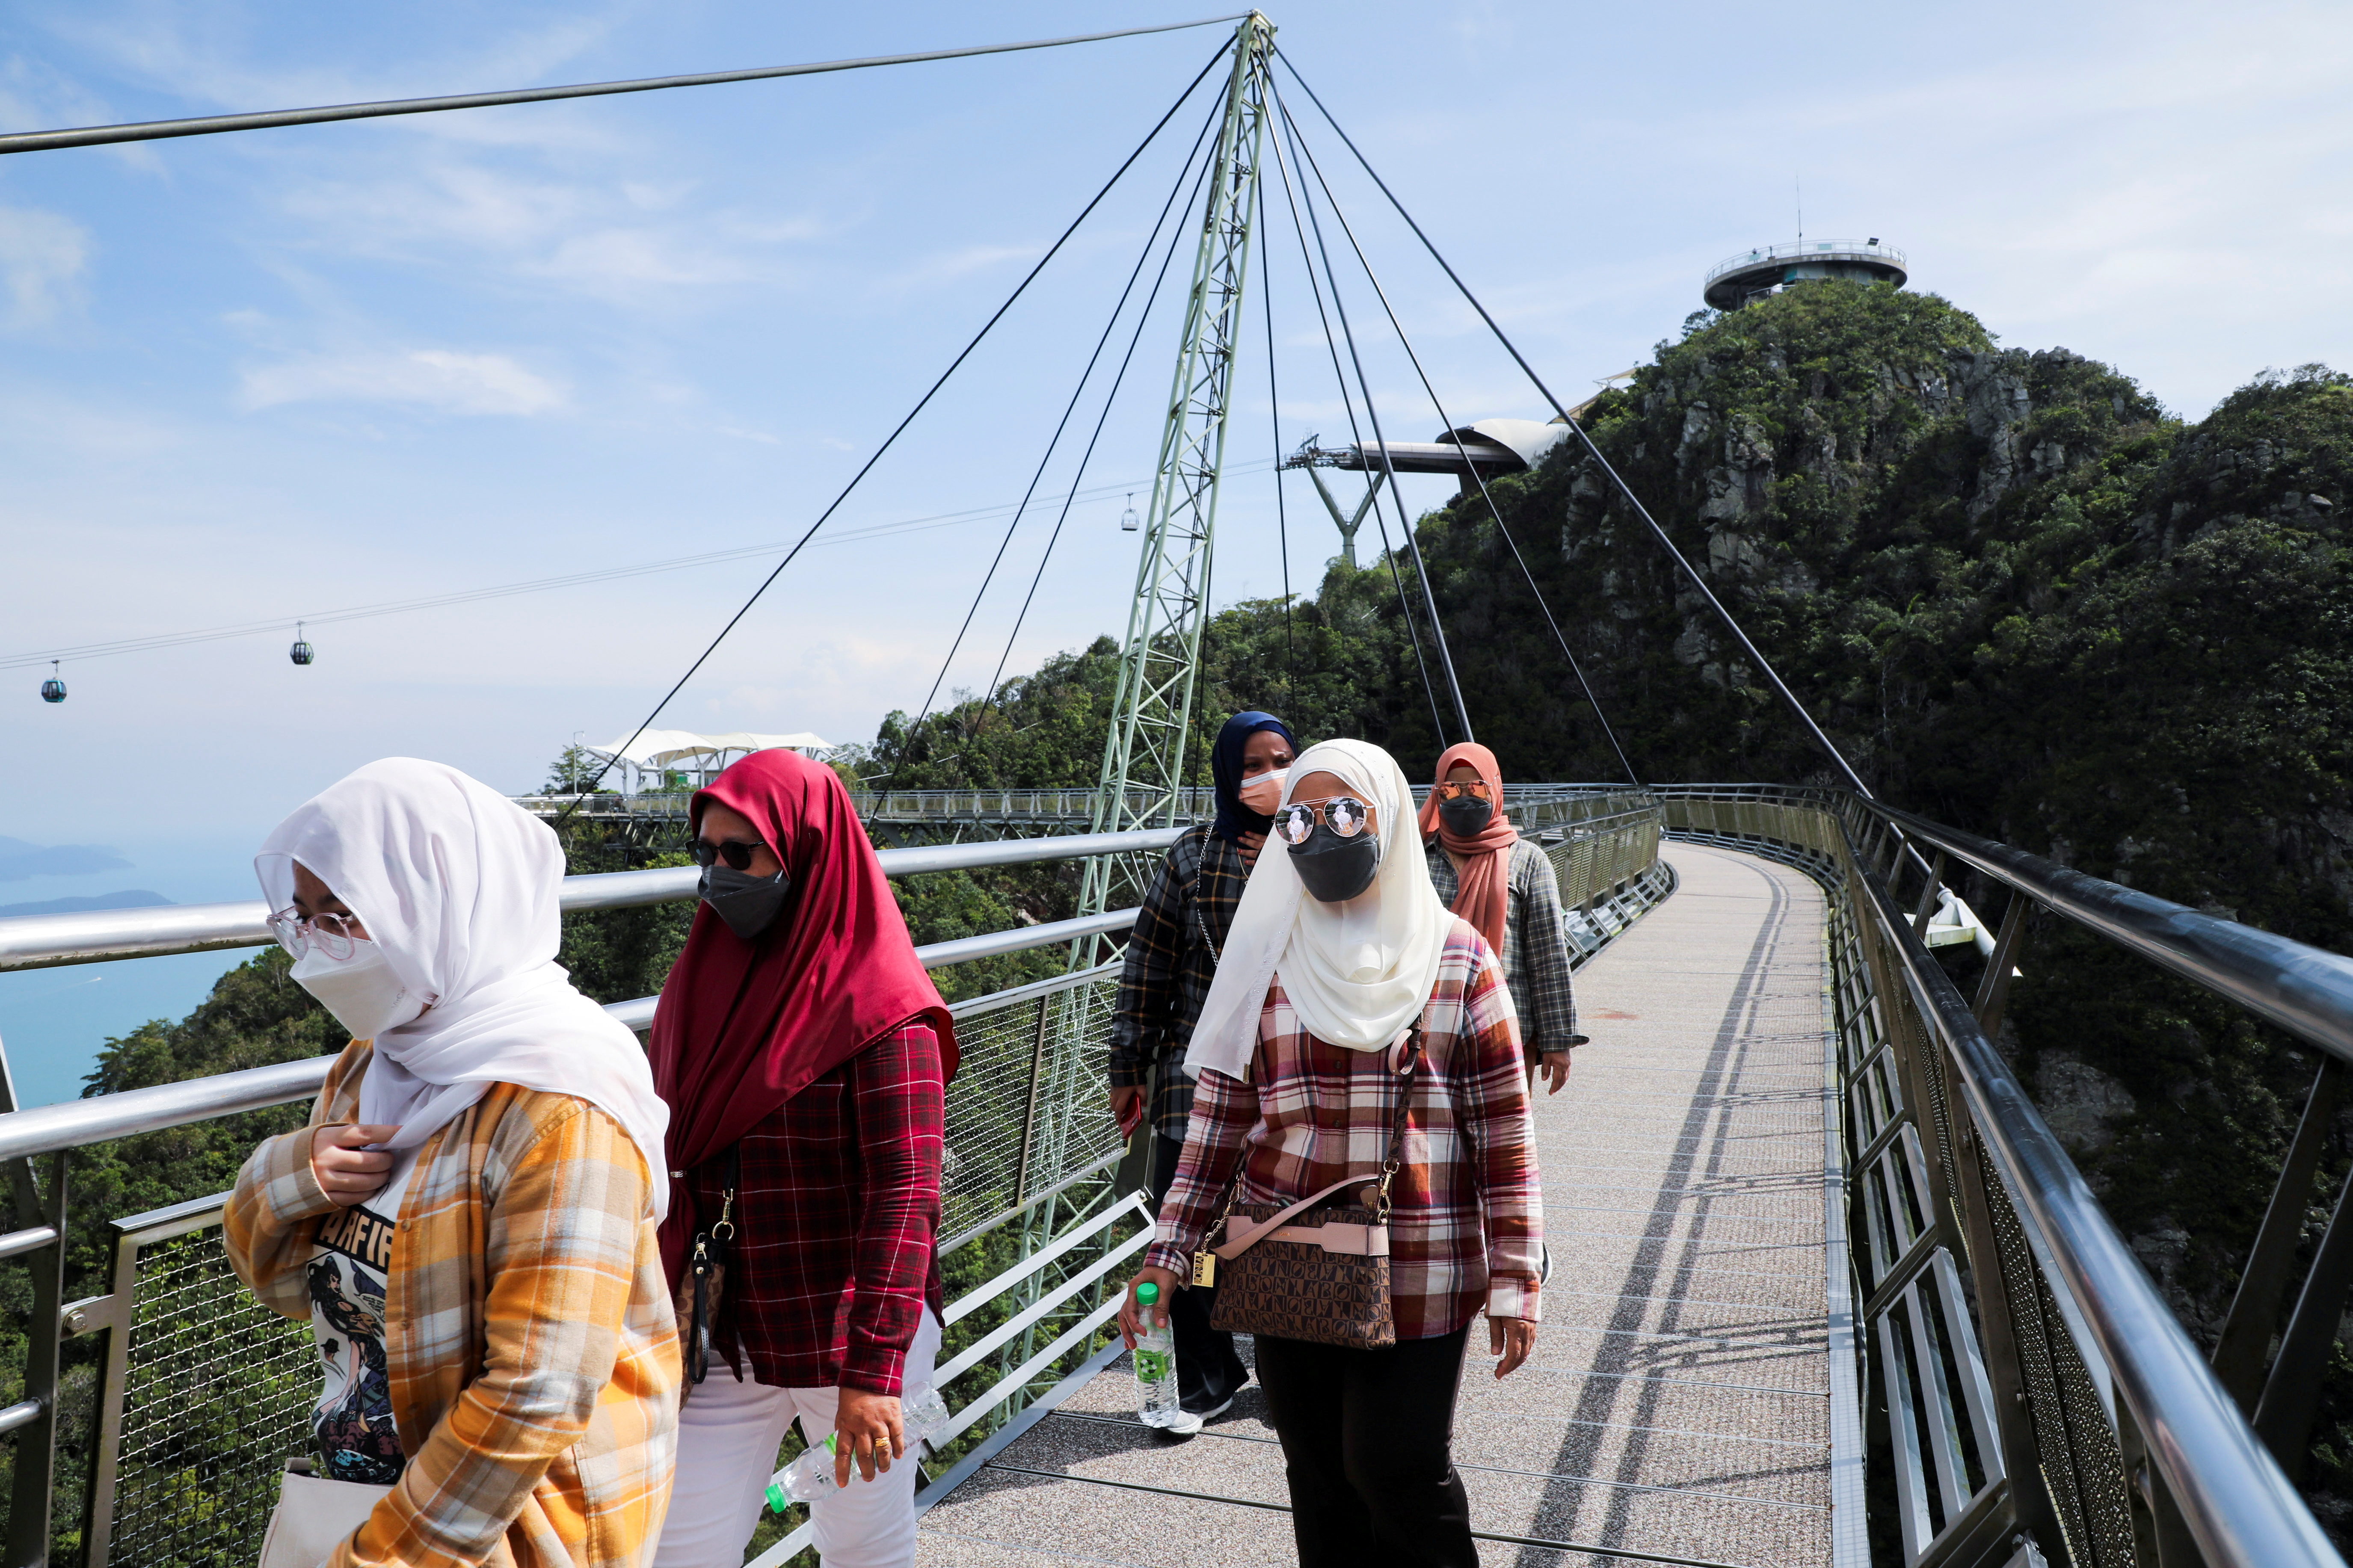 Tourists visit the Sky Bridge as it reopens to domestic tourists amid the coronavirus disease (COVID-19) pandemic in Langkawi